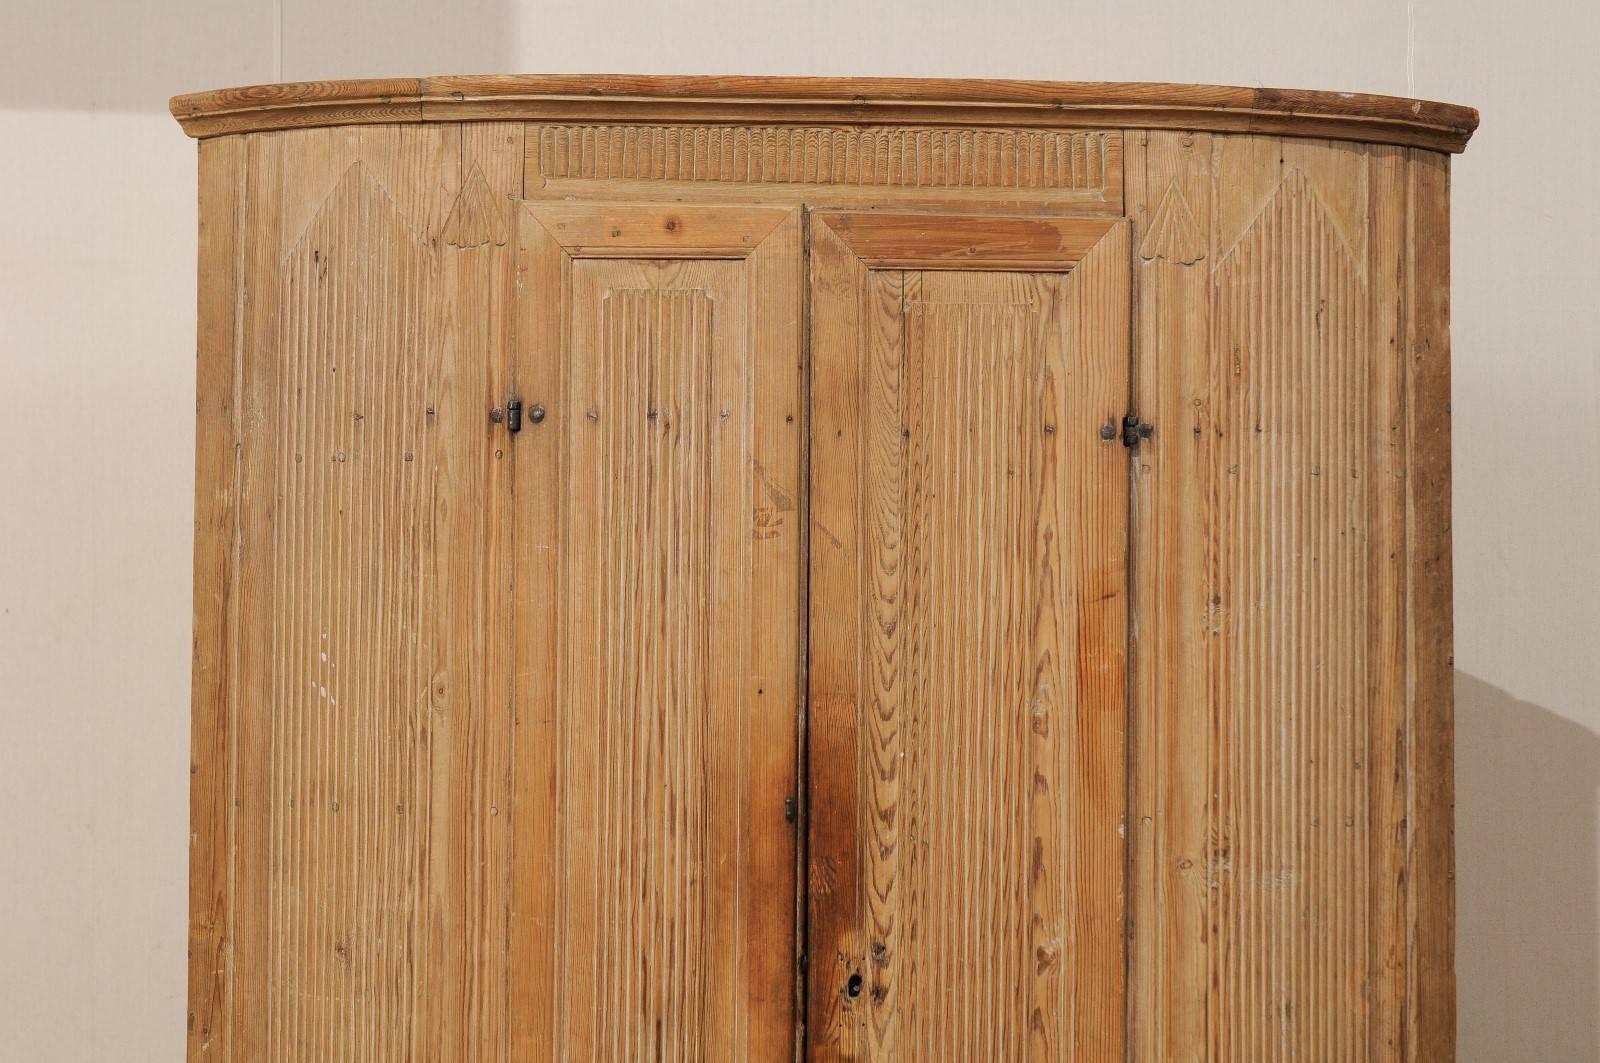 Swedish 19th Century Period Gustavian Corner Cabinet, Vertical Reeds and Natural Wood For Sale